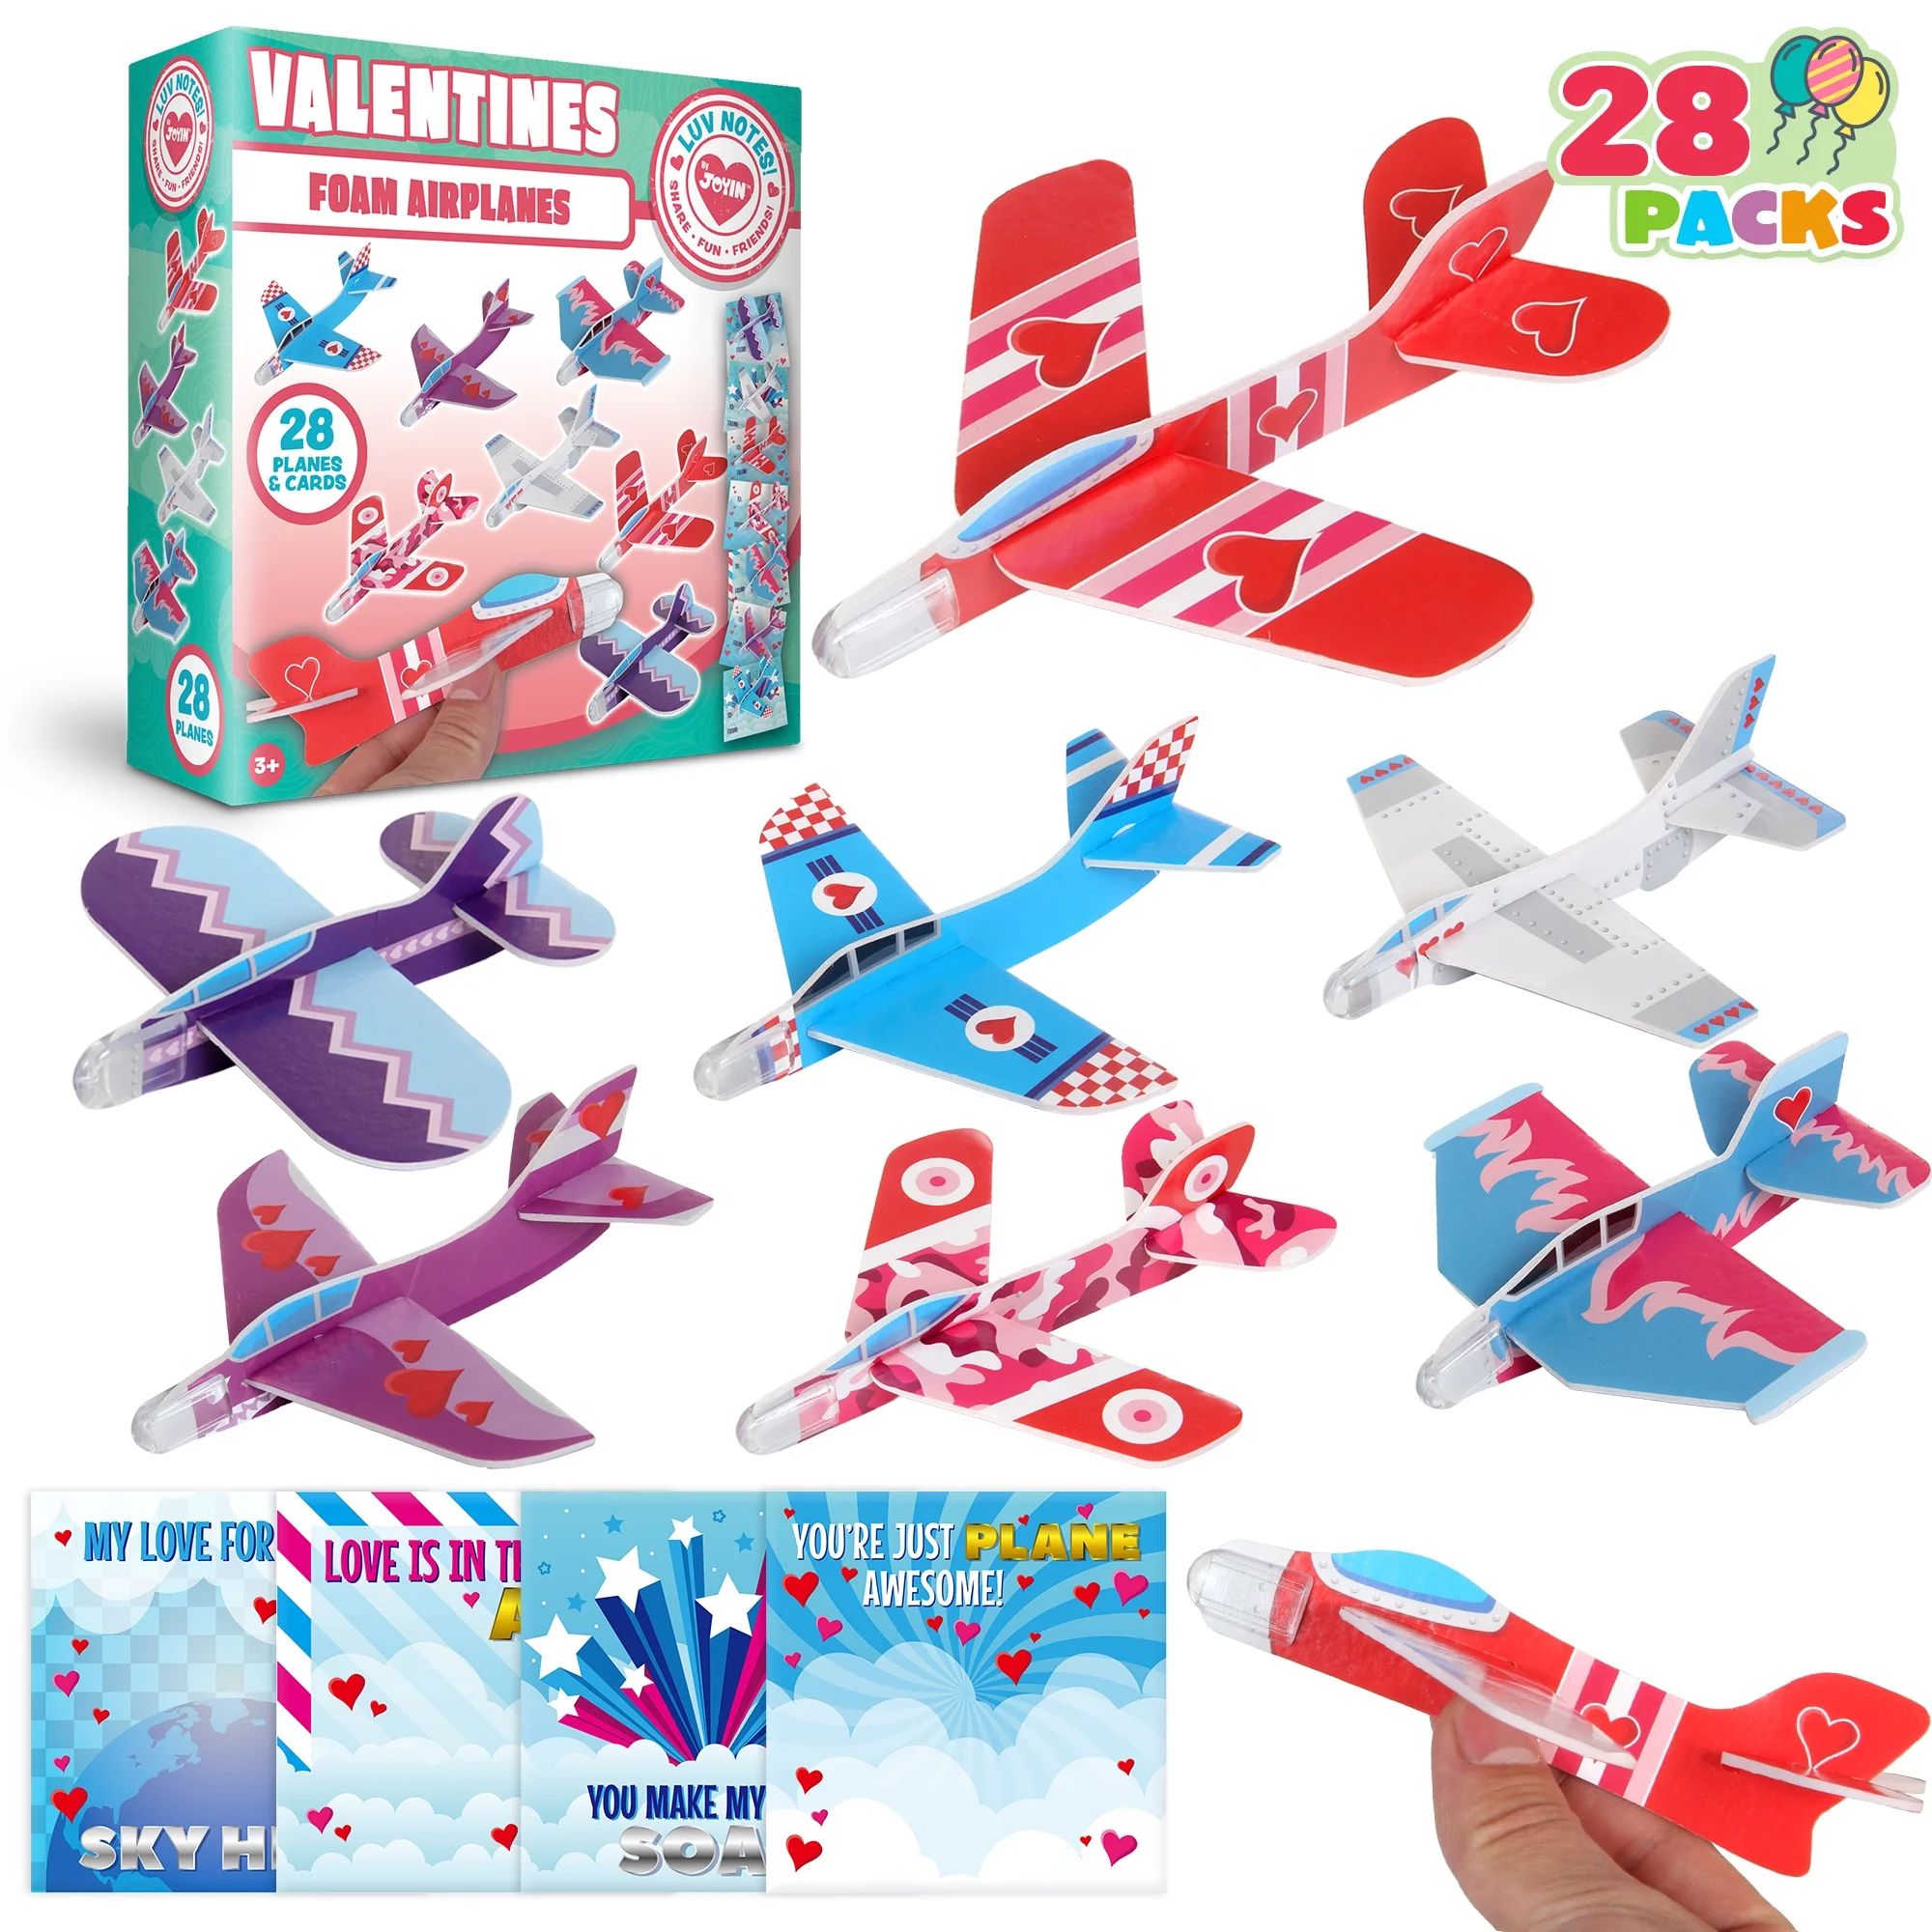 Syncfun 28 Packs Valentines Day Gifts Cards with Foam Airplane for Kids Valentine Exchange Cards ... | Walmart (US)